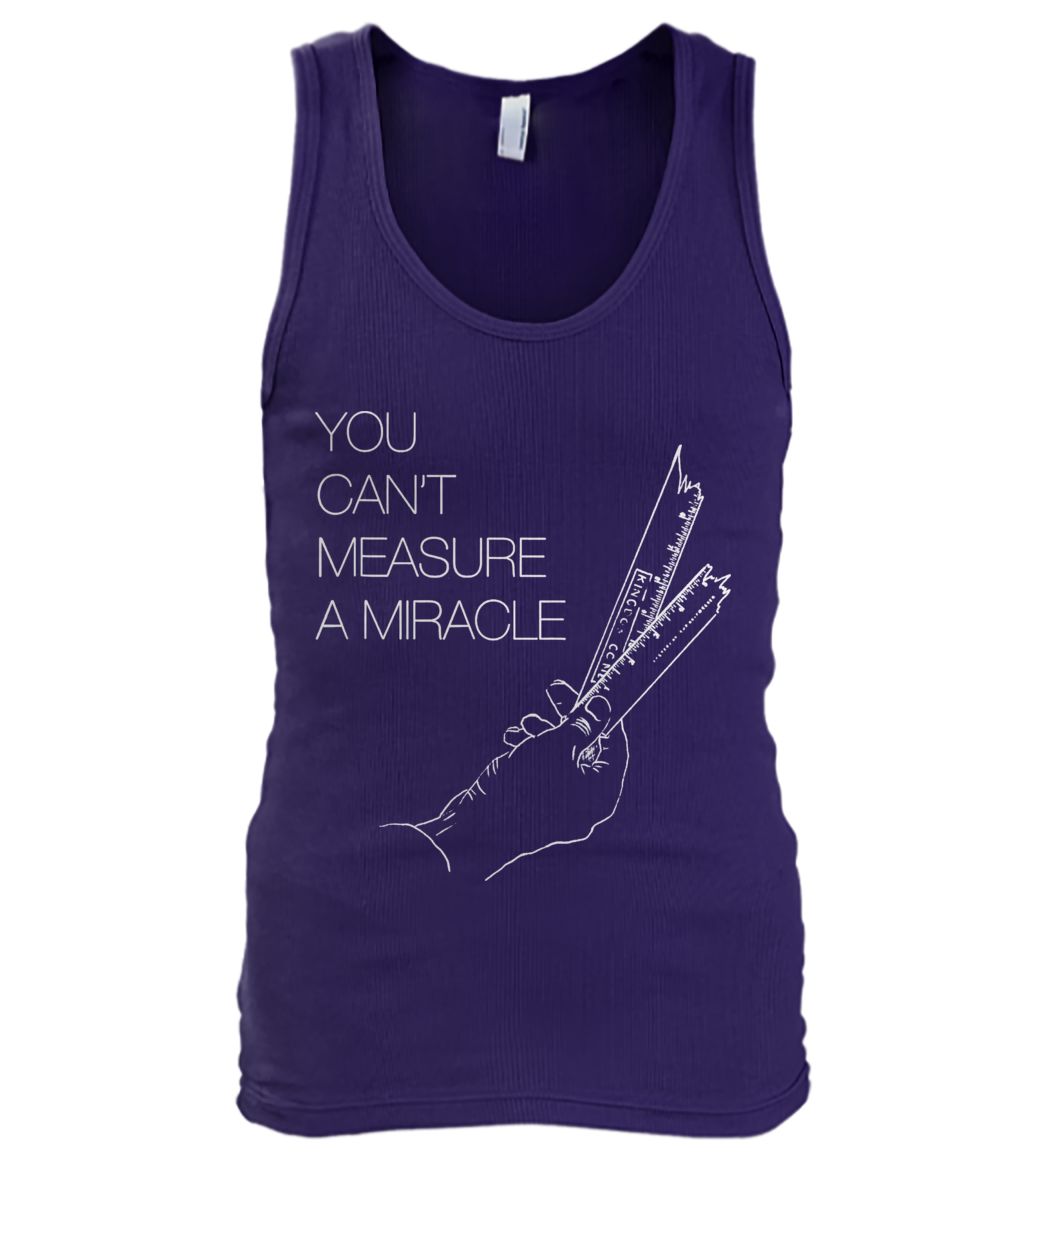 You can't measure a miracle men's tank top